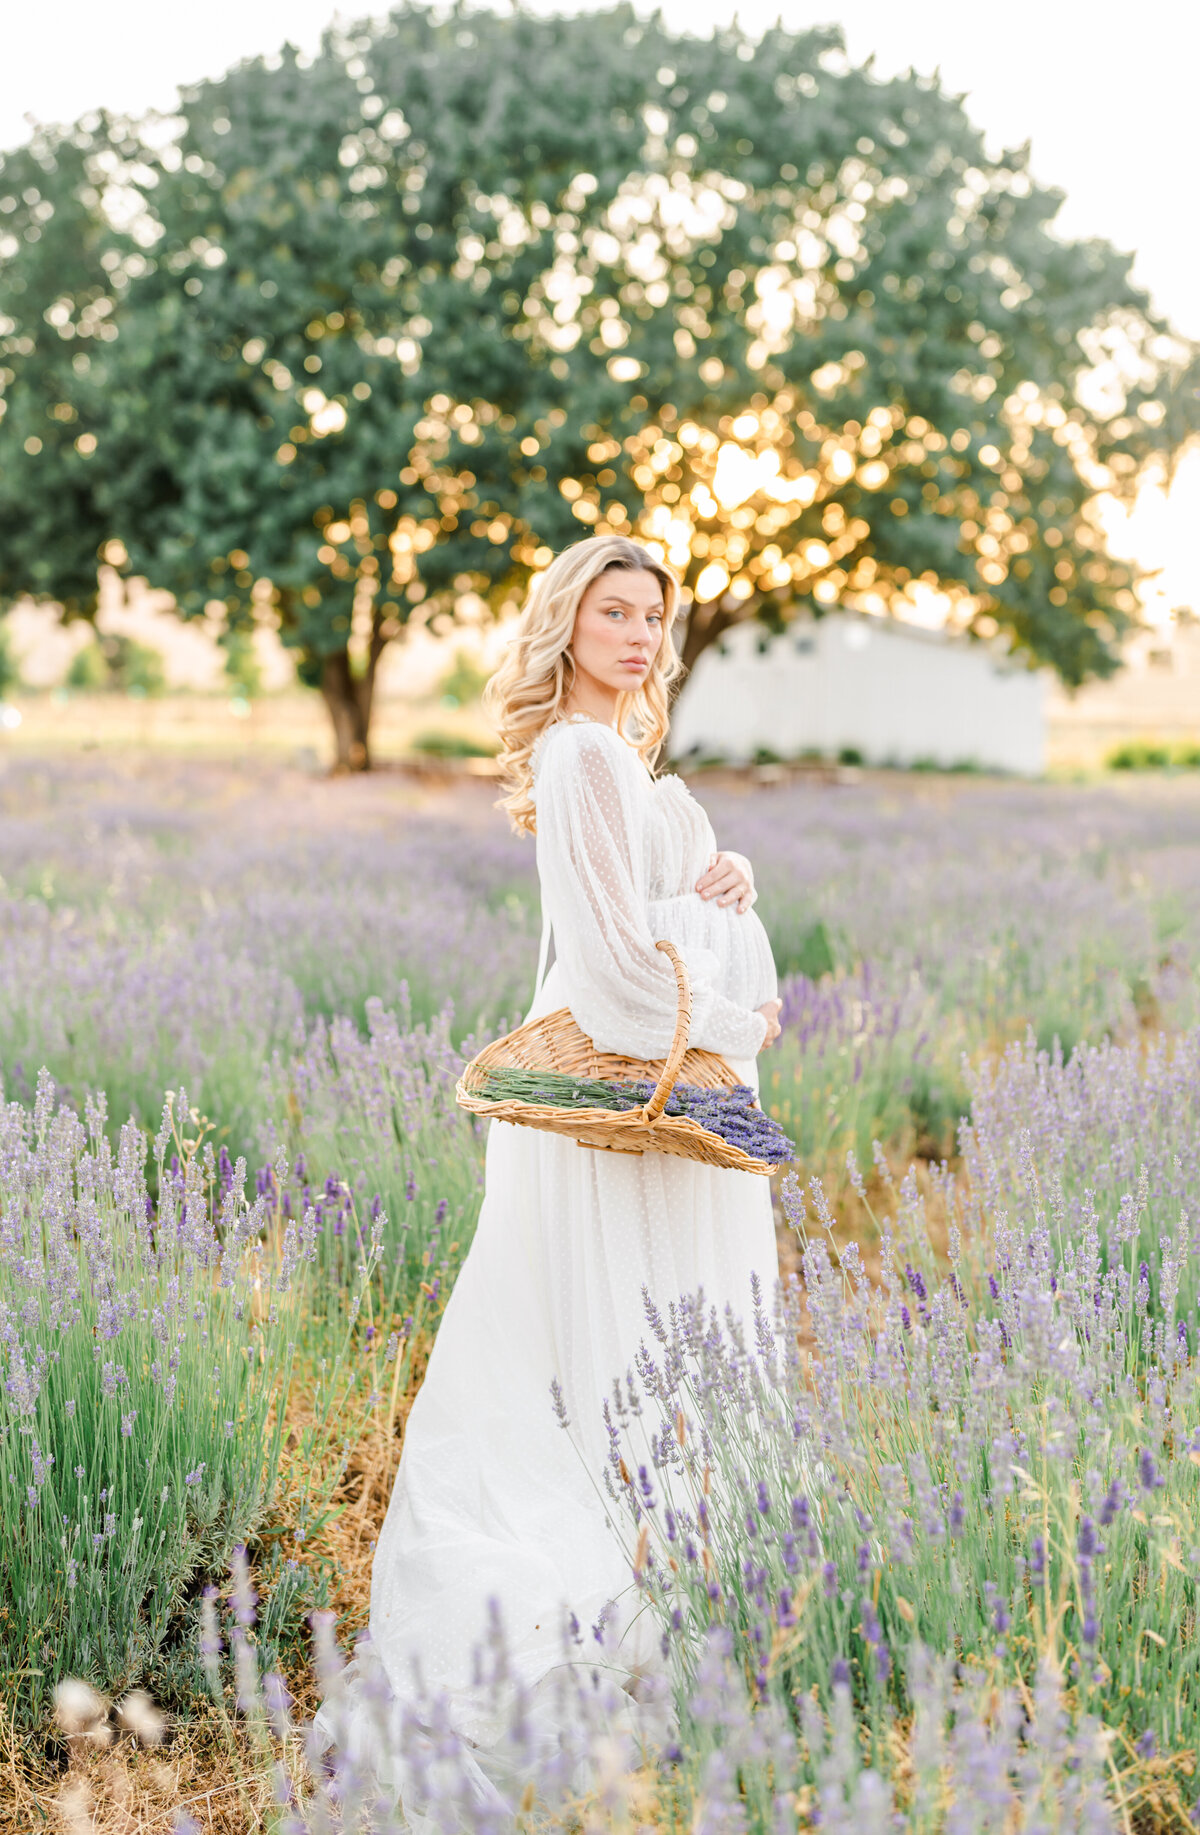 An expecting mother dressed in a long white gown stands in a field of lavender flowers carrying a basket of lavender flowers and holding her beautiful bump photographed by Bay area photographer, Light Livin Photography.